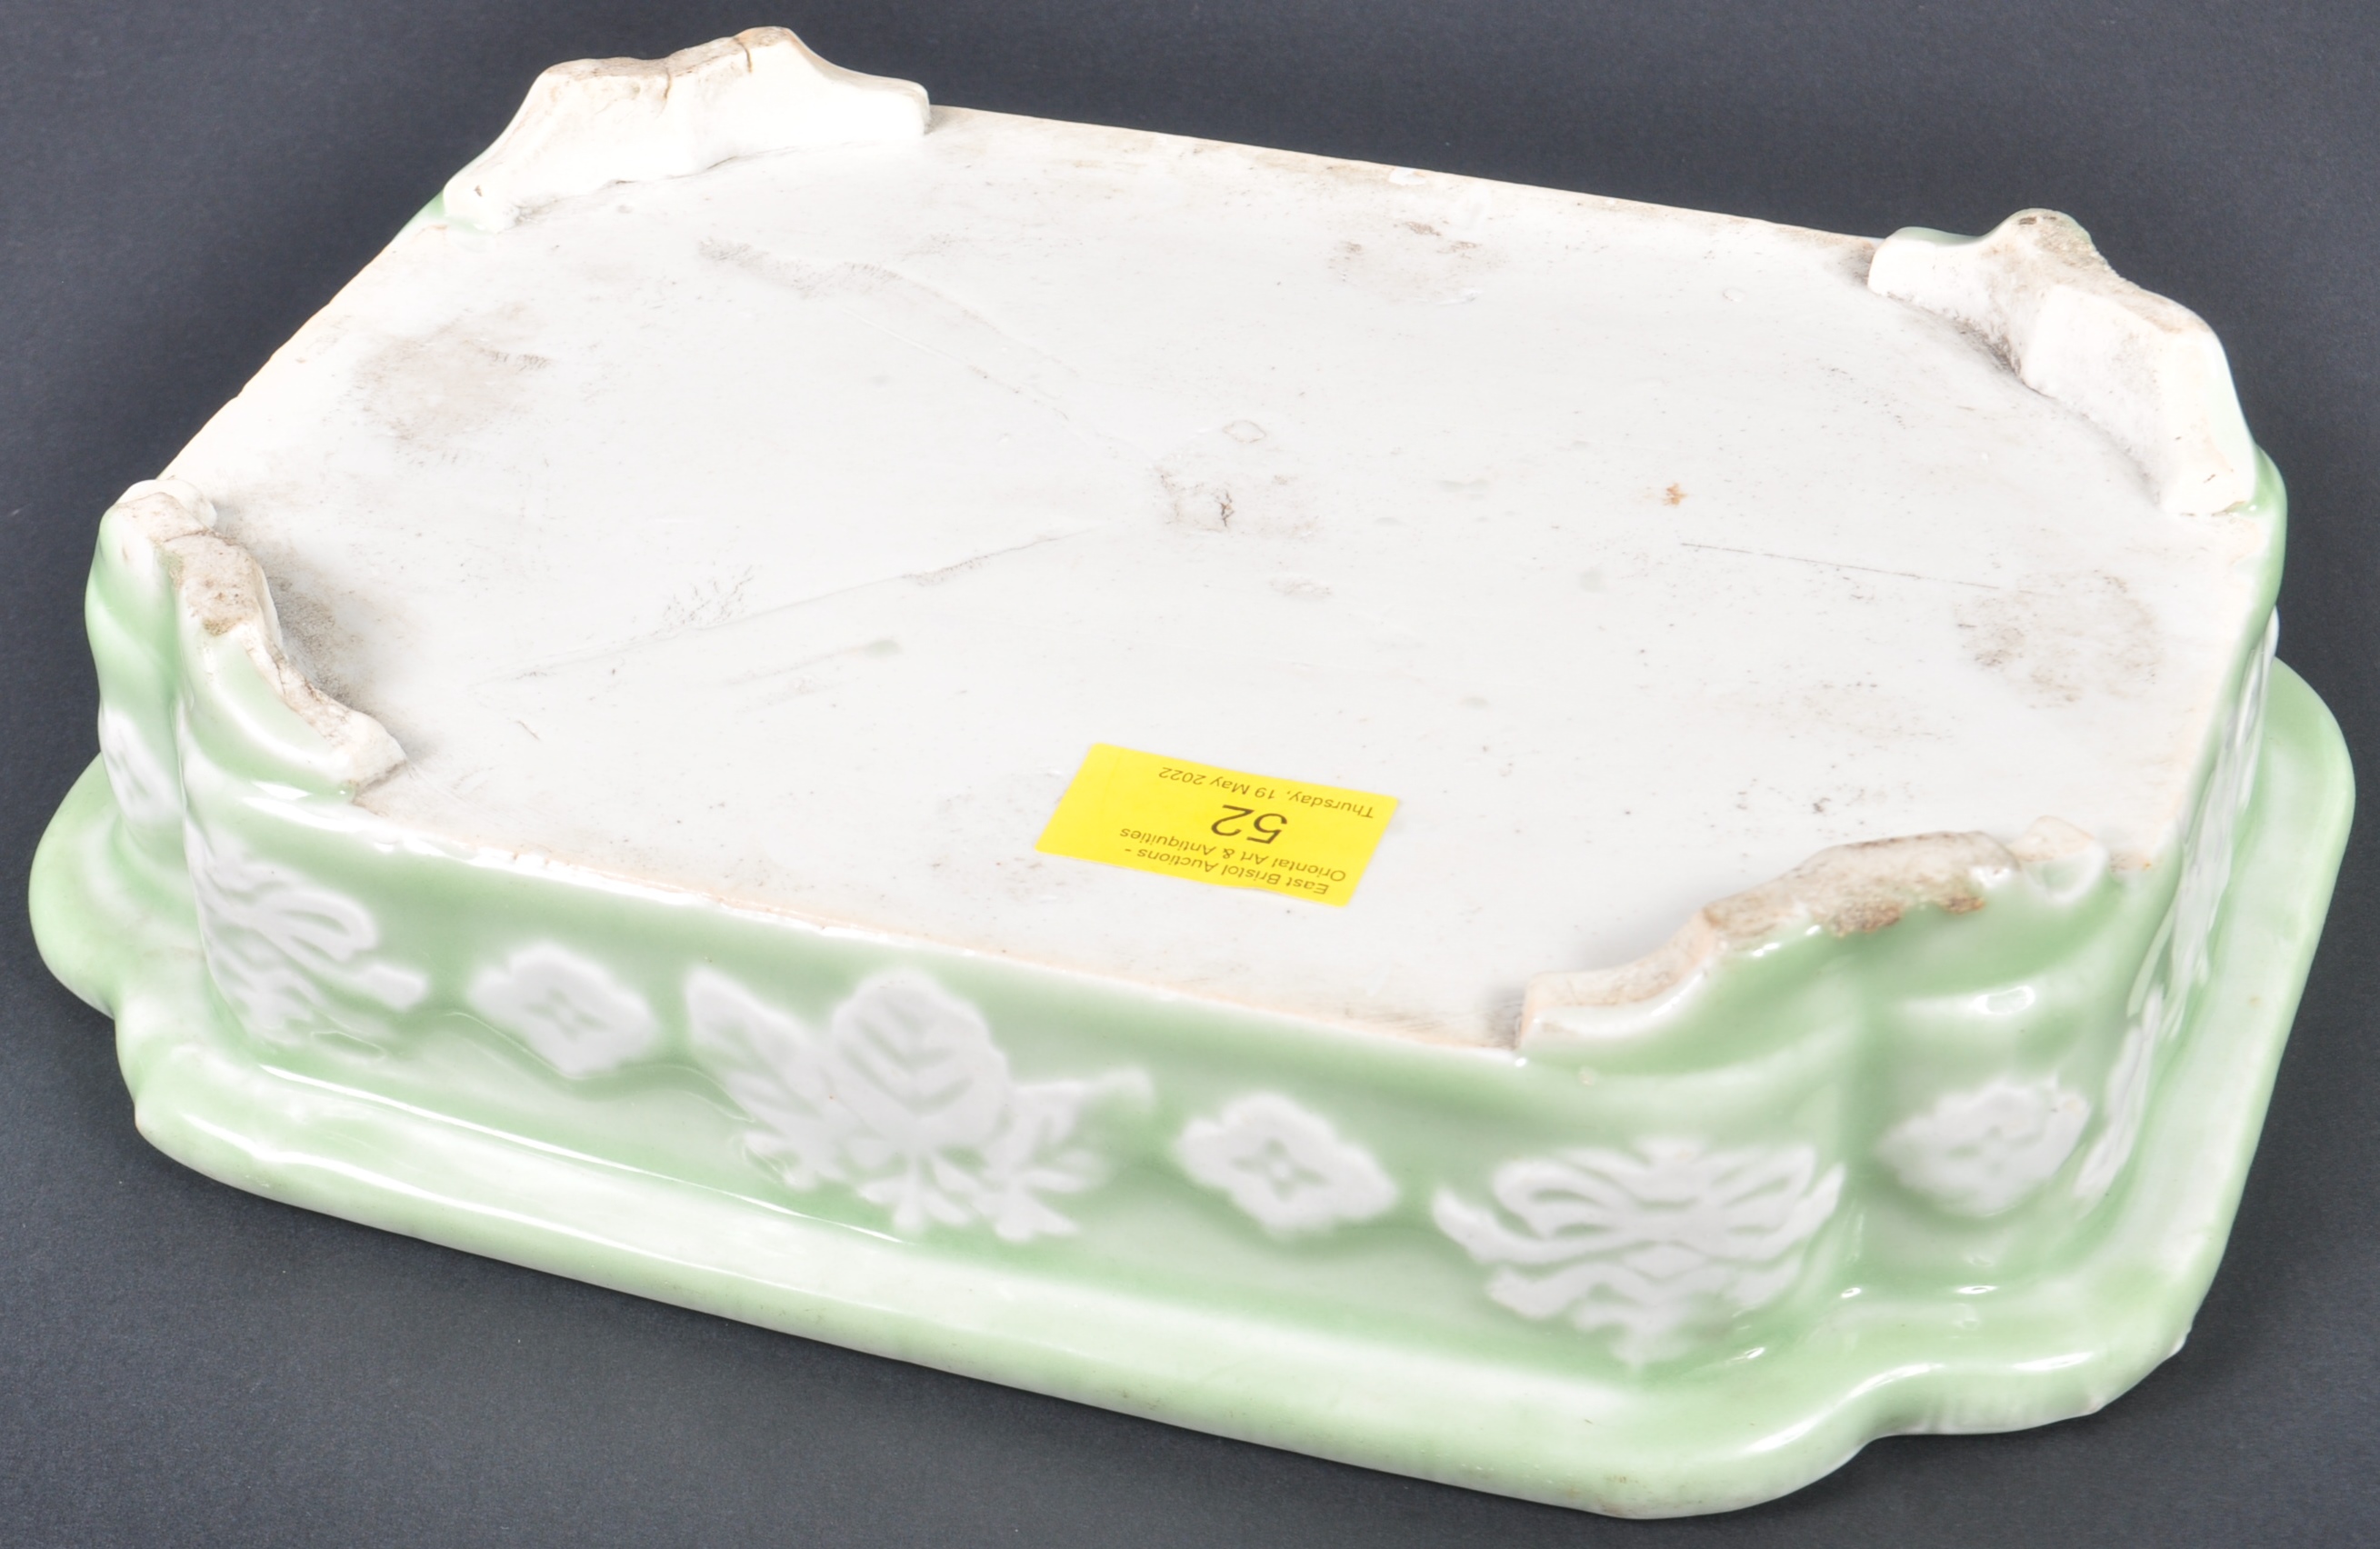 EARLY 20TH CENTURY CHINESE CELADON LOW PLANTER - Image 6 of 6